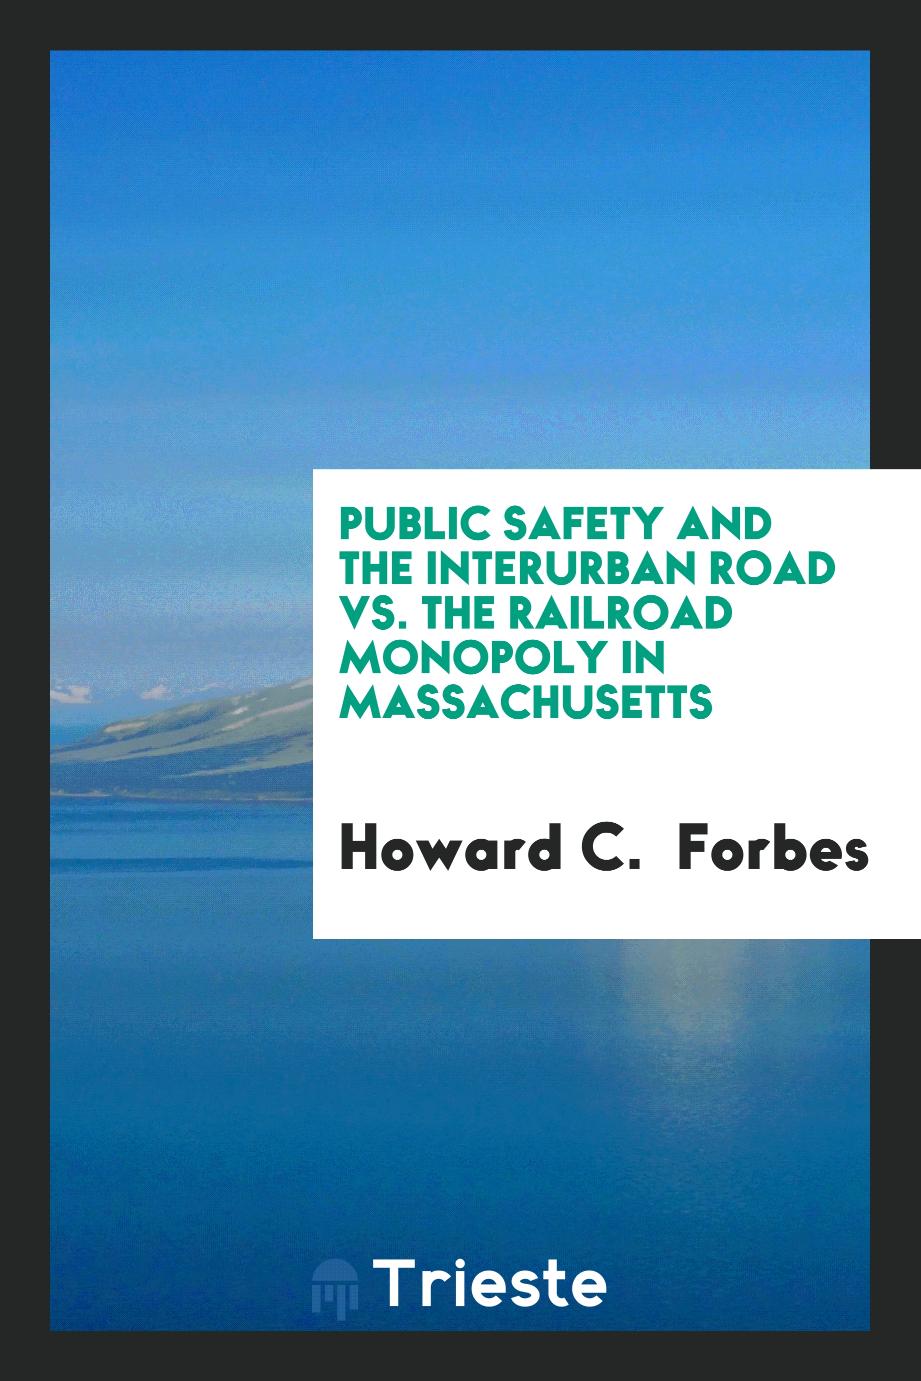 Public safety and the interurban road vs. the railroad monopoly in Massachusetts